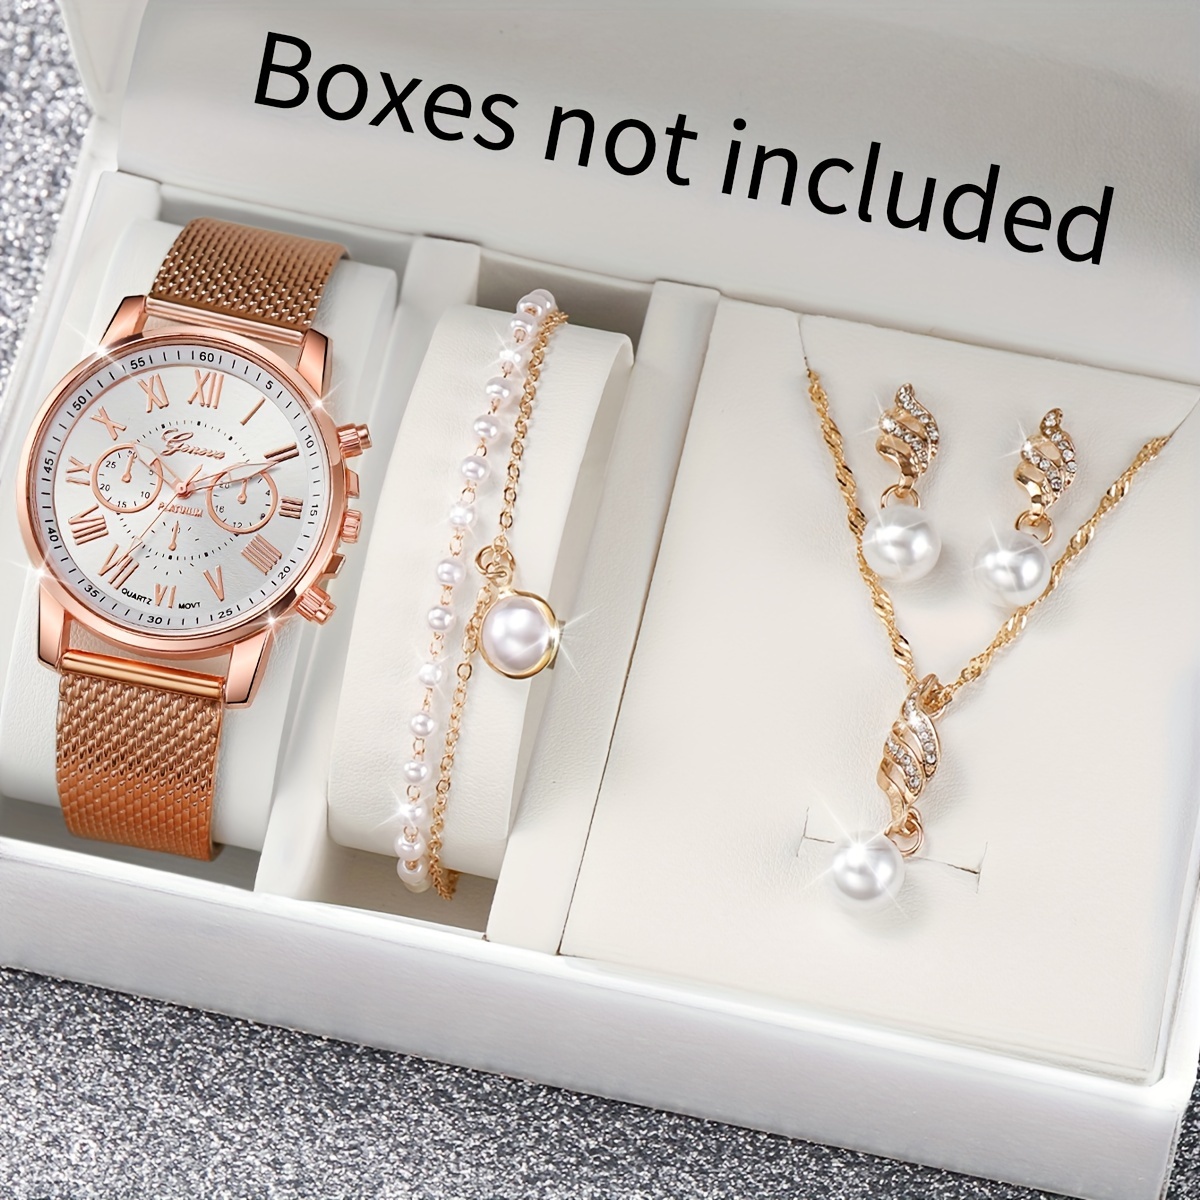 

5pcs/set Women's Casual Fashion Quartz Watch Analog Roman Numerals Wrist Watch & Faux Pearl Jewelry Set, Gift For Mom Her